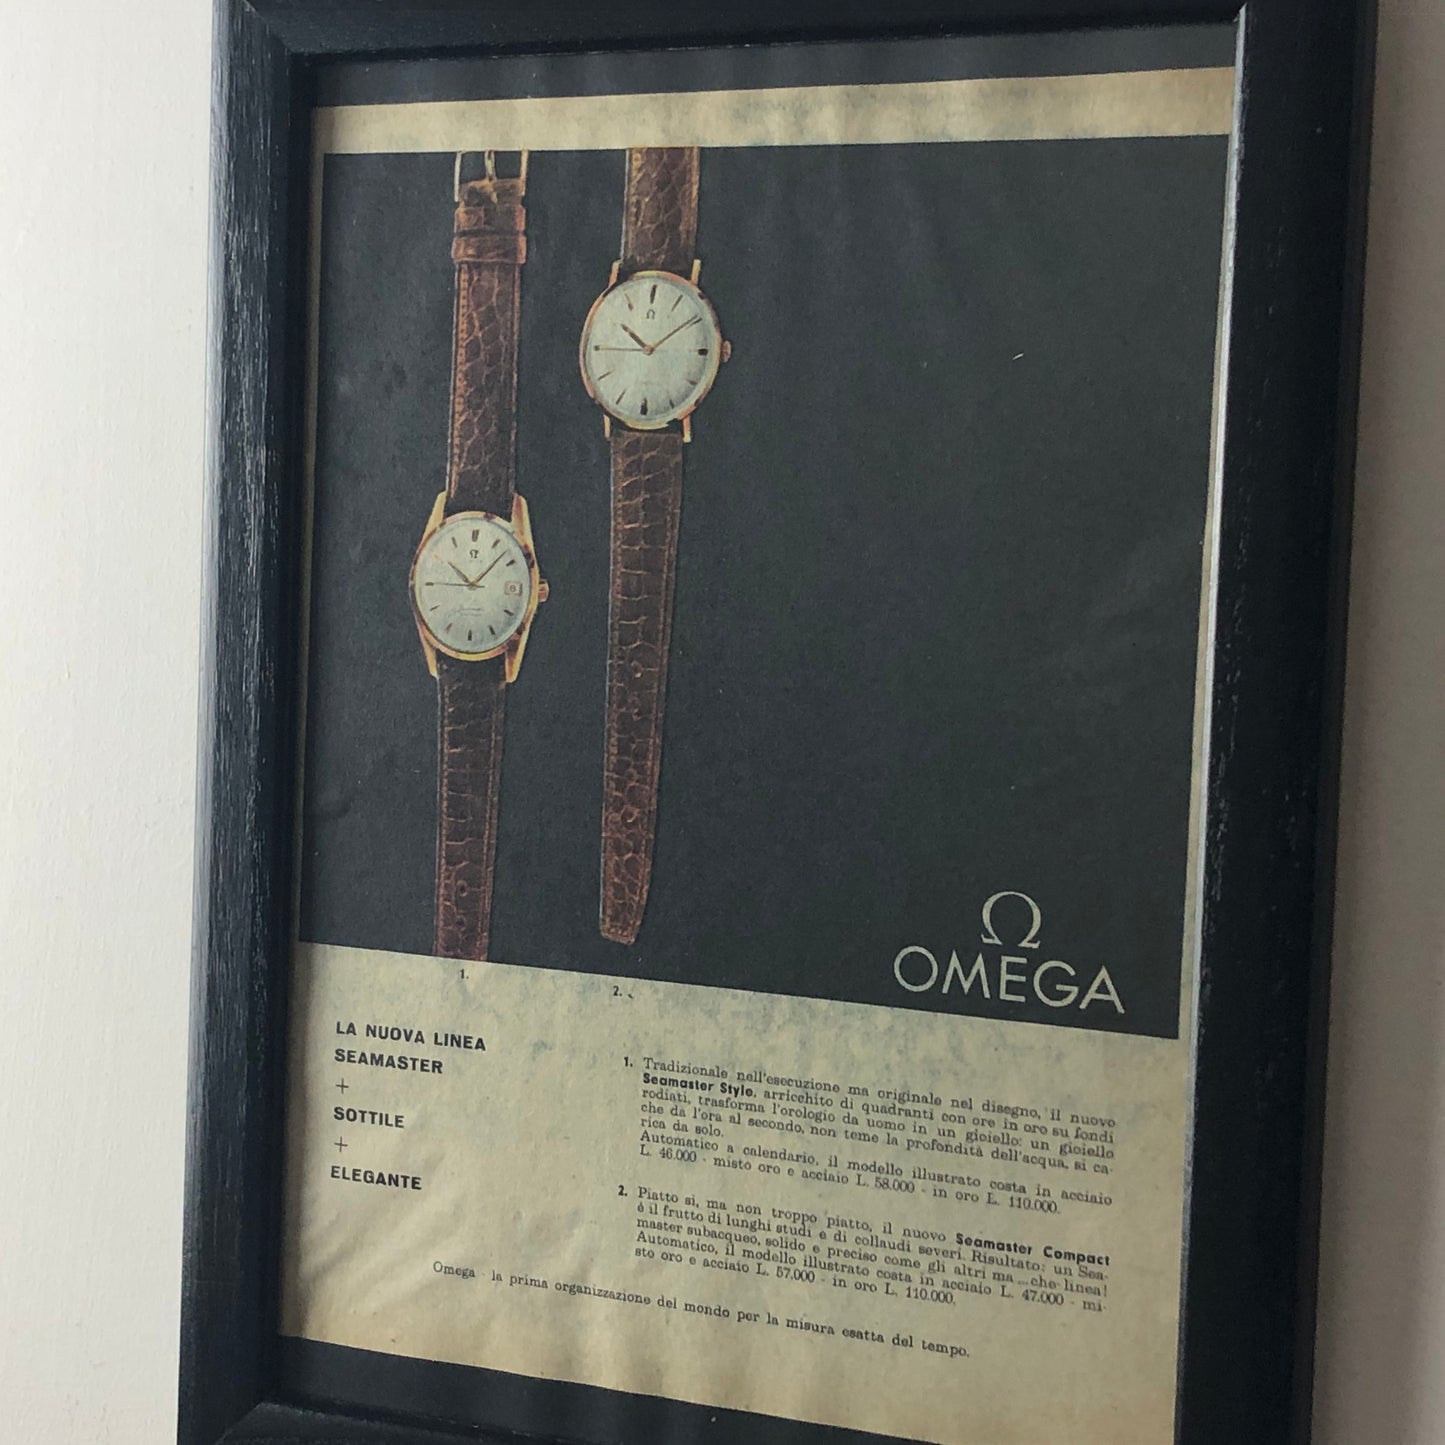 Omega, Advertising Year 1960 Omega Seamaster with Price List